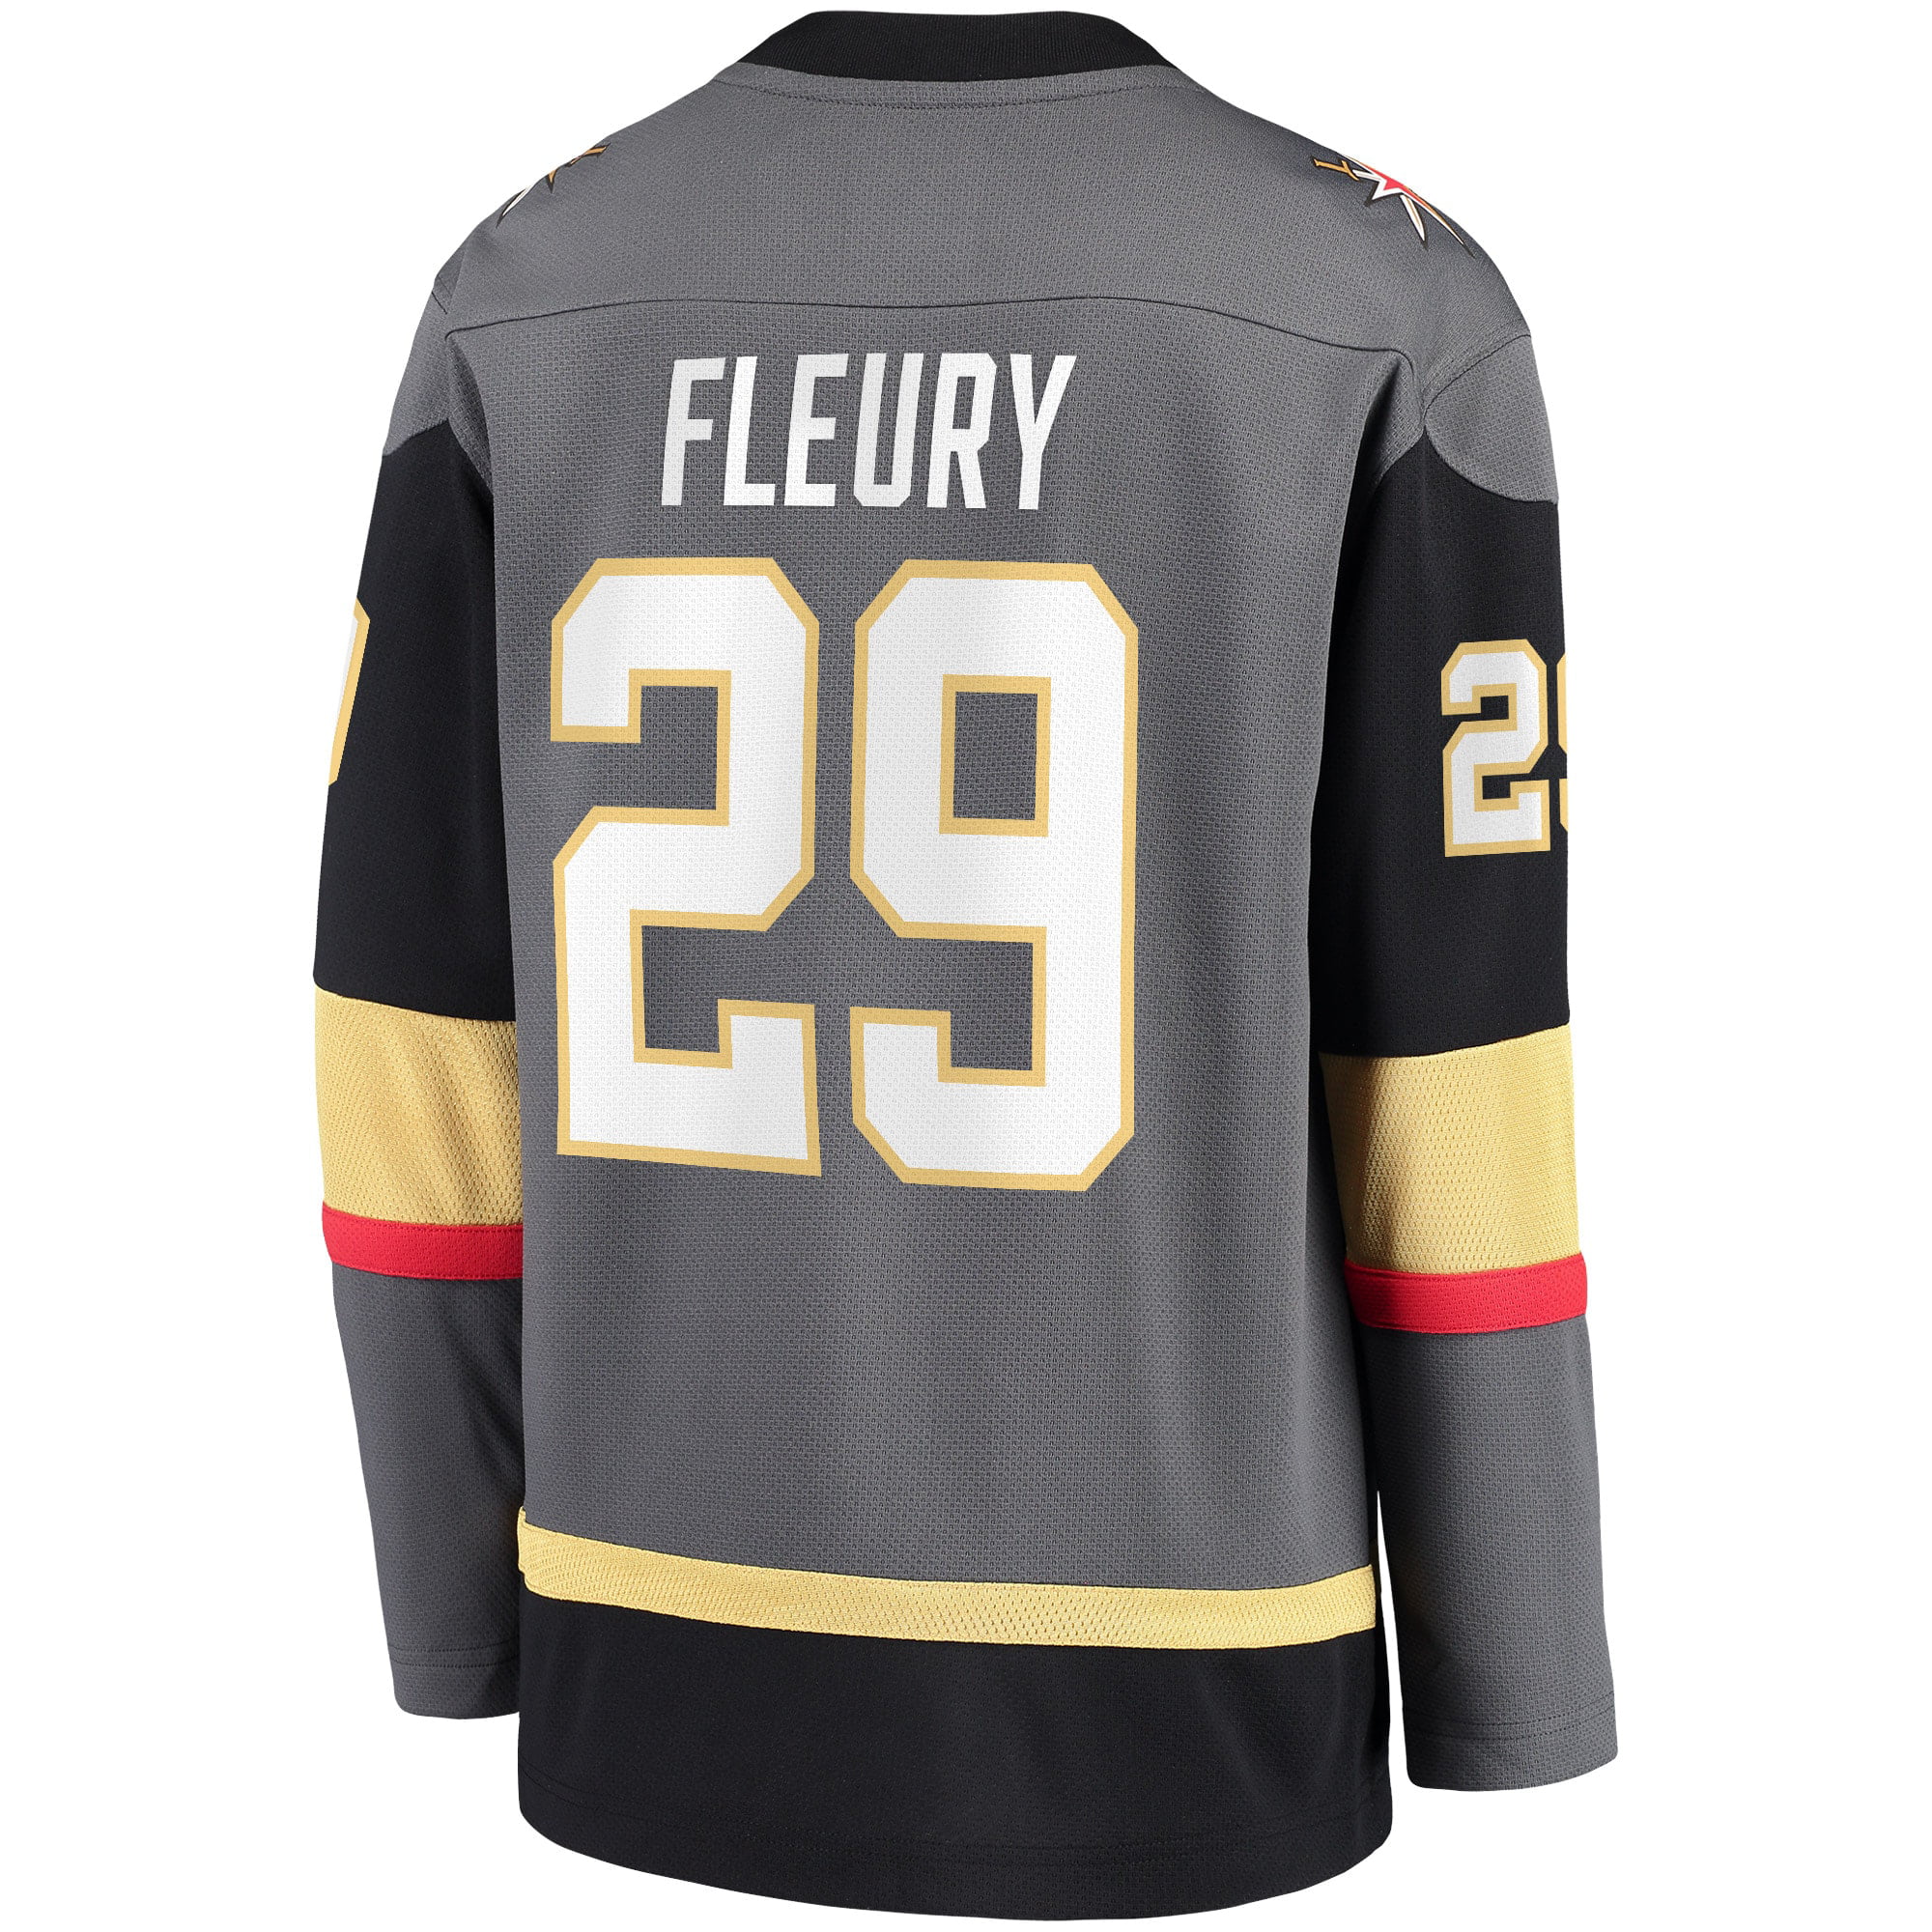 fleury youth jersey